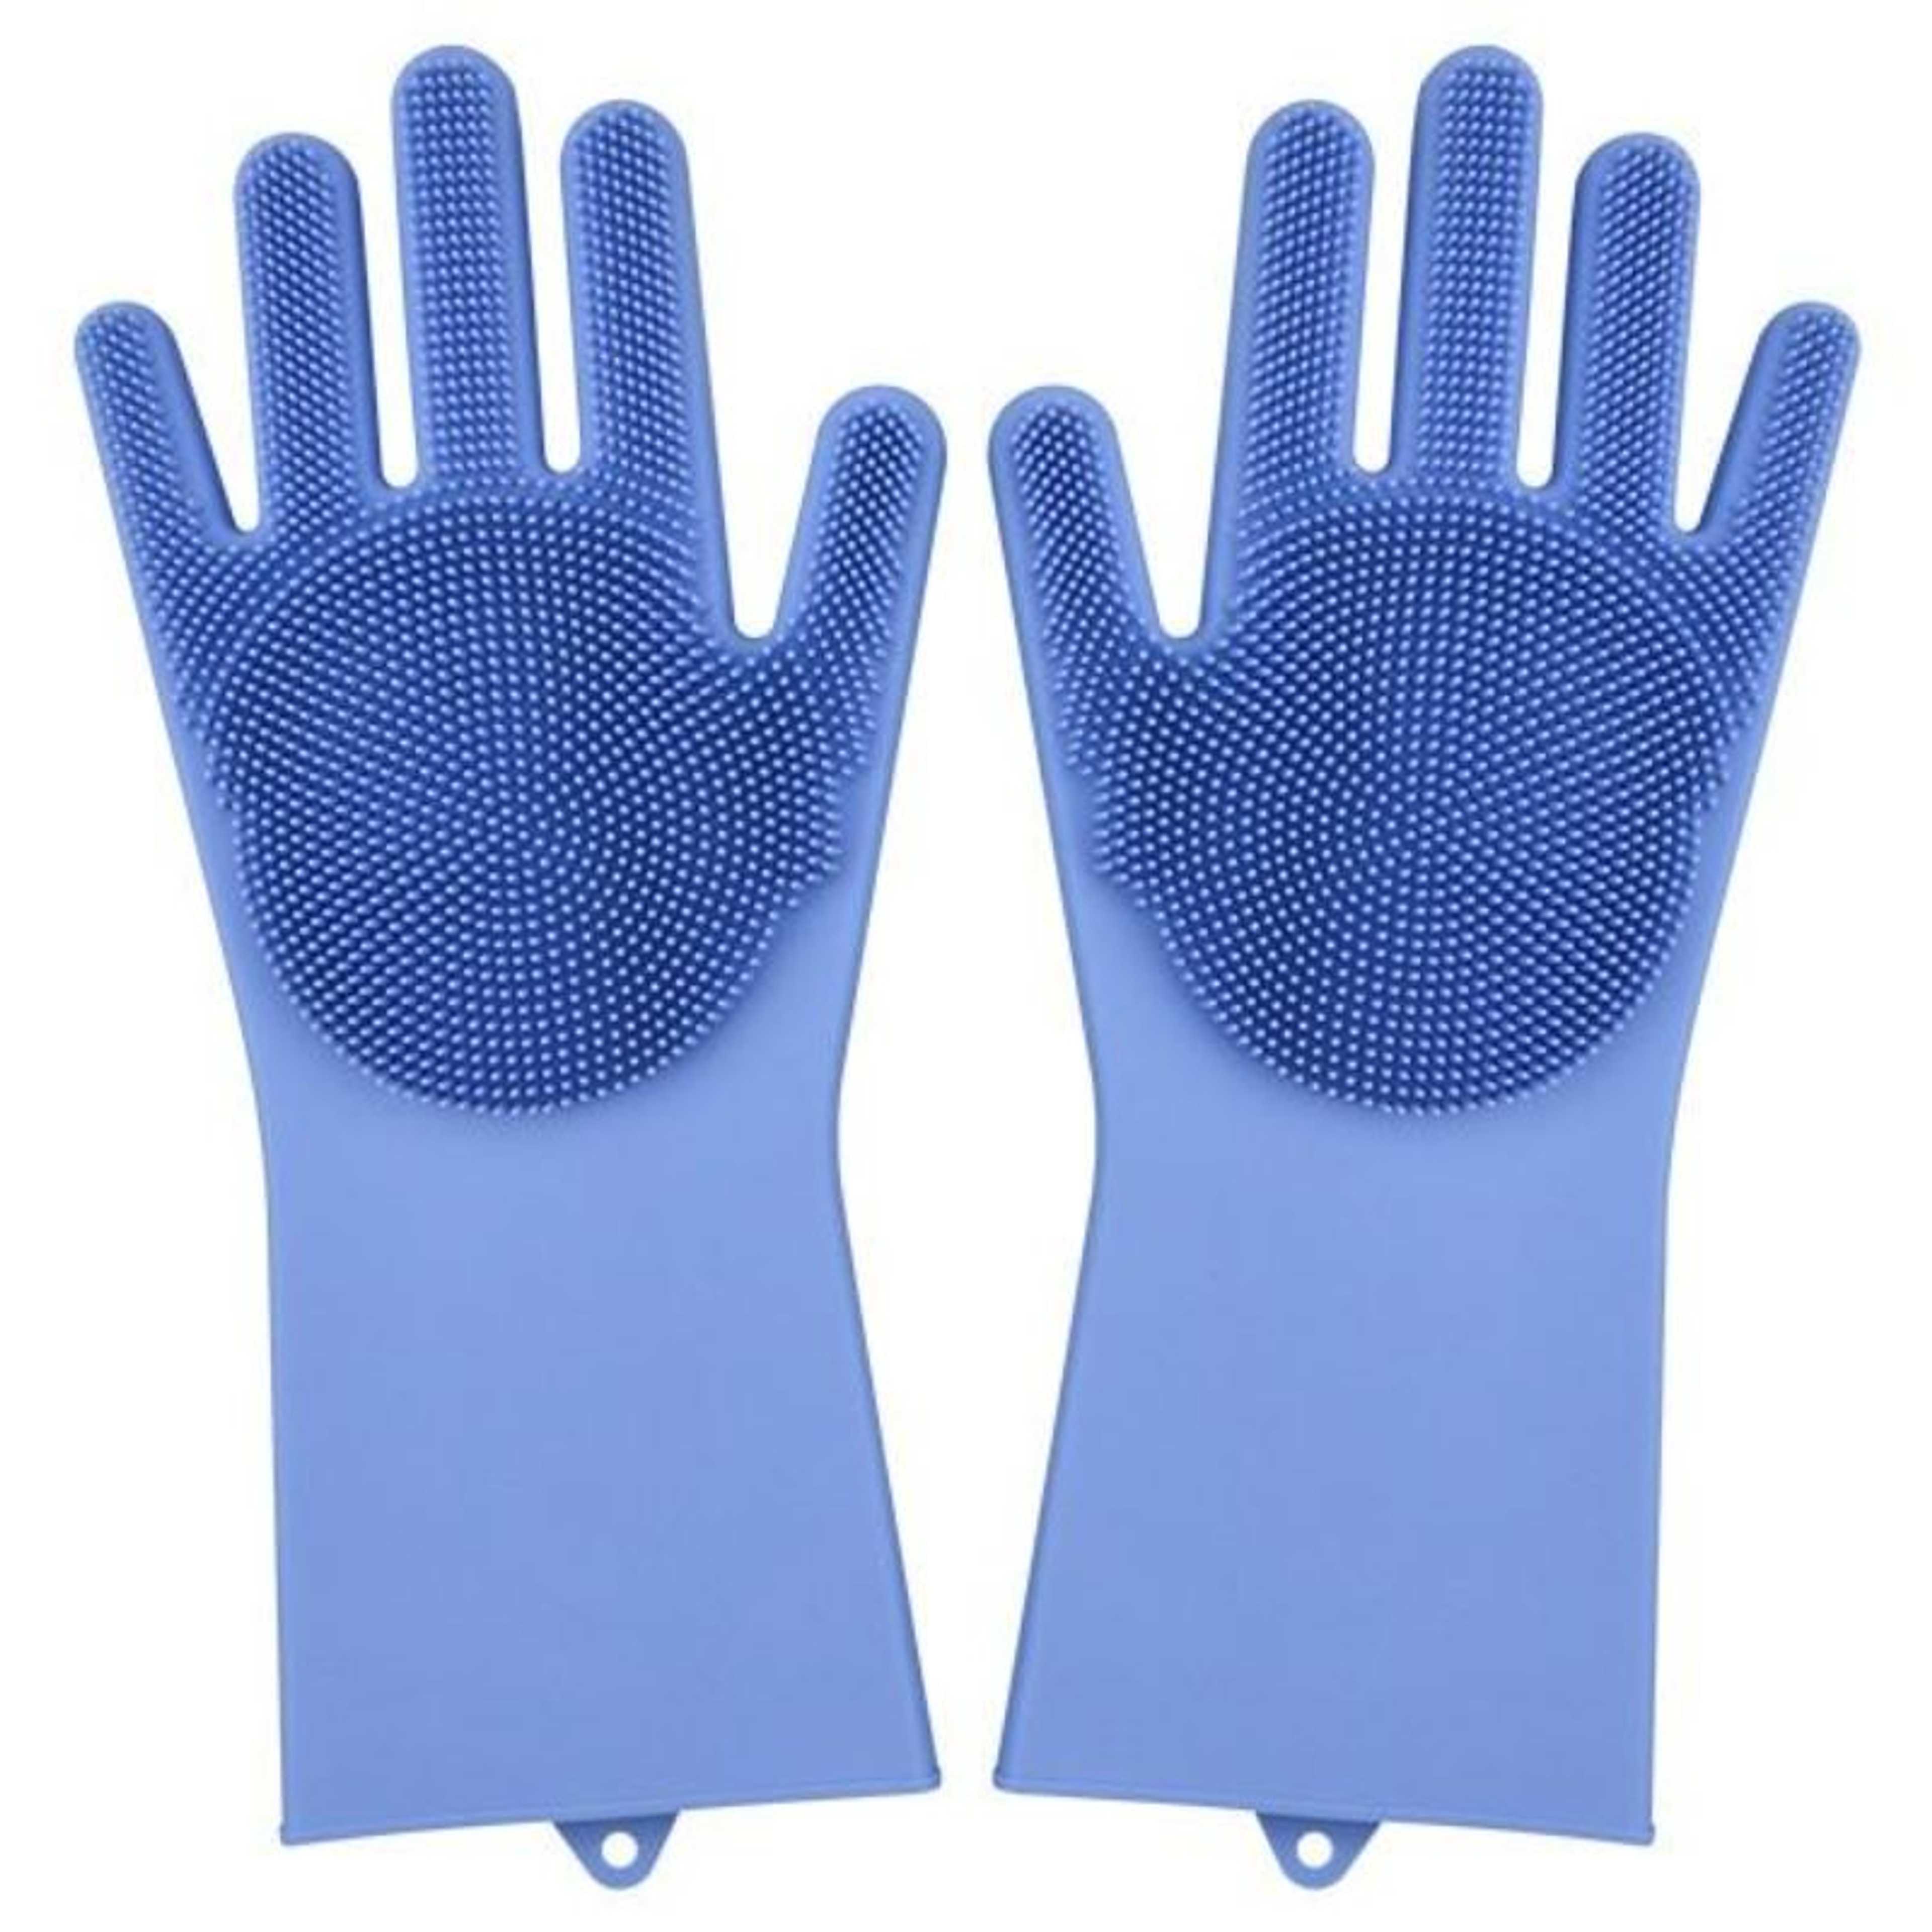 Magic Silicone Dishwashing Gloves 2 in 1 Wash Scrubber Household Supplies, Kitchen Tools for Dish Cleaning, Car Wash - 1 Pair